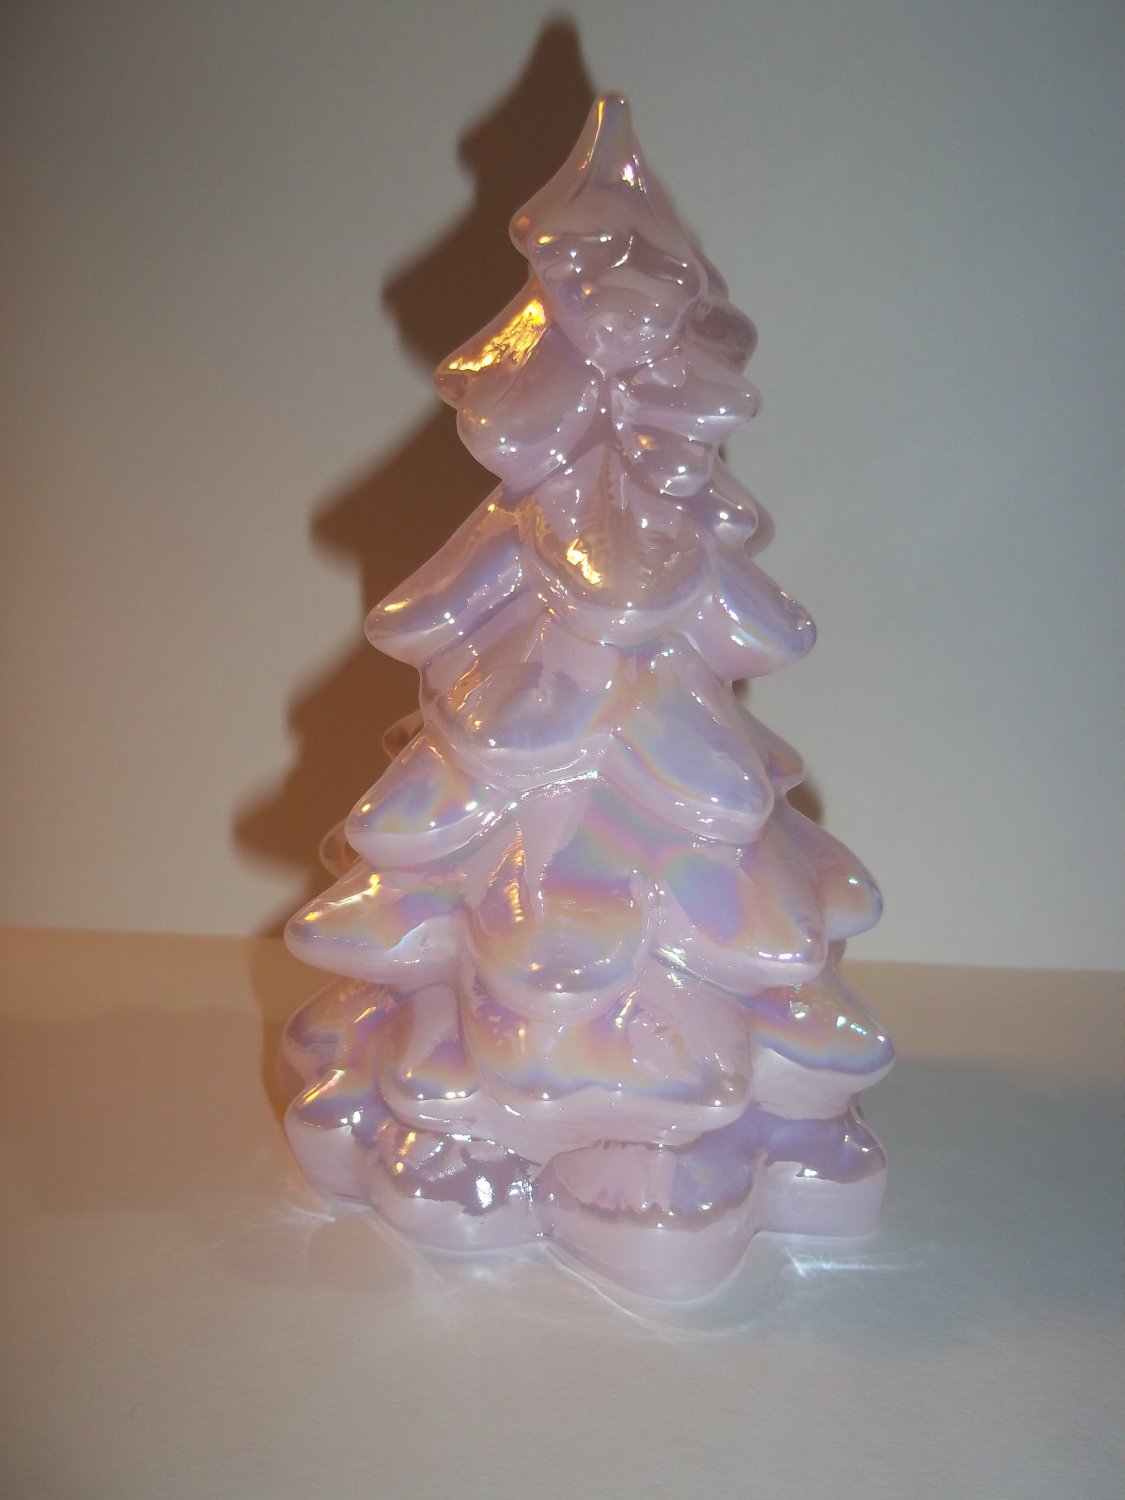 Mosser Glass Crown Tuscan OPAQUE PINK CARNIVAL 8" LARGE CHRISTMAS TREE Figurine